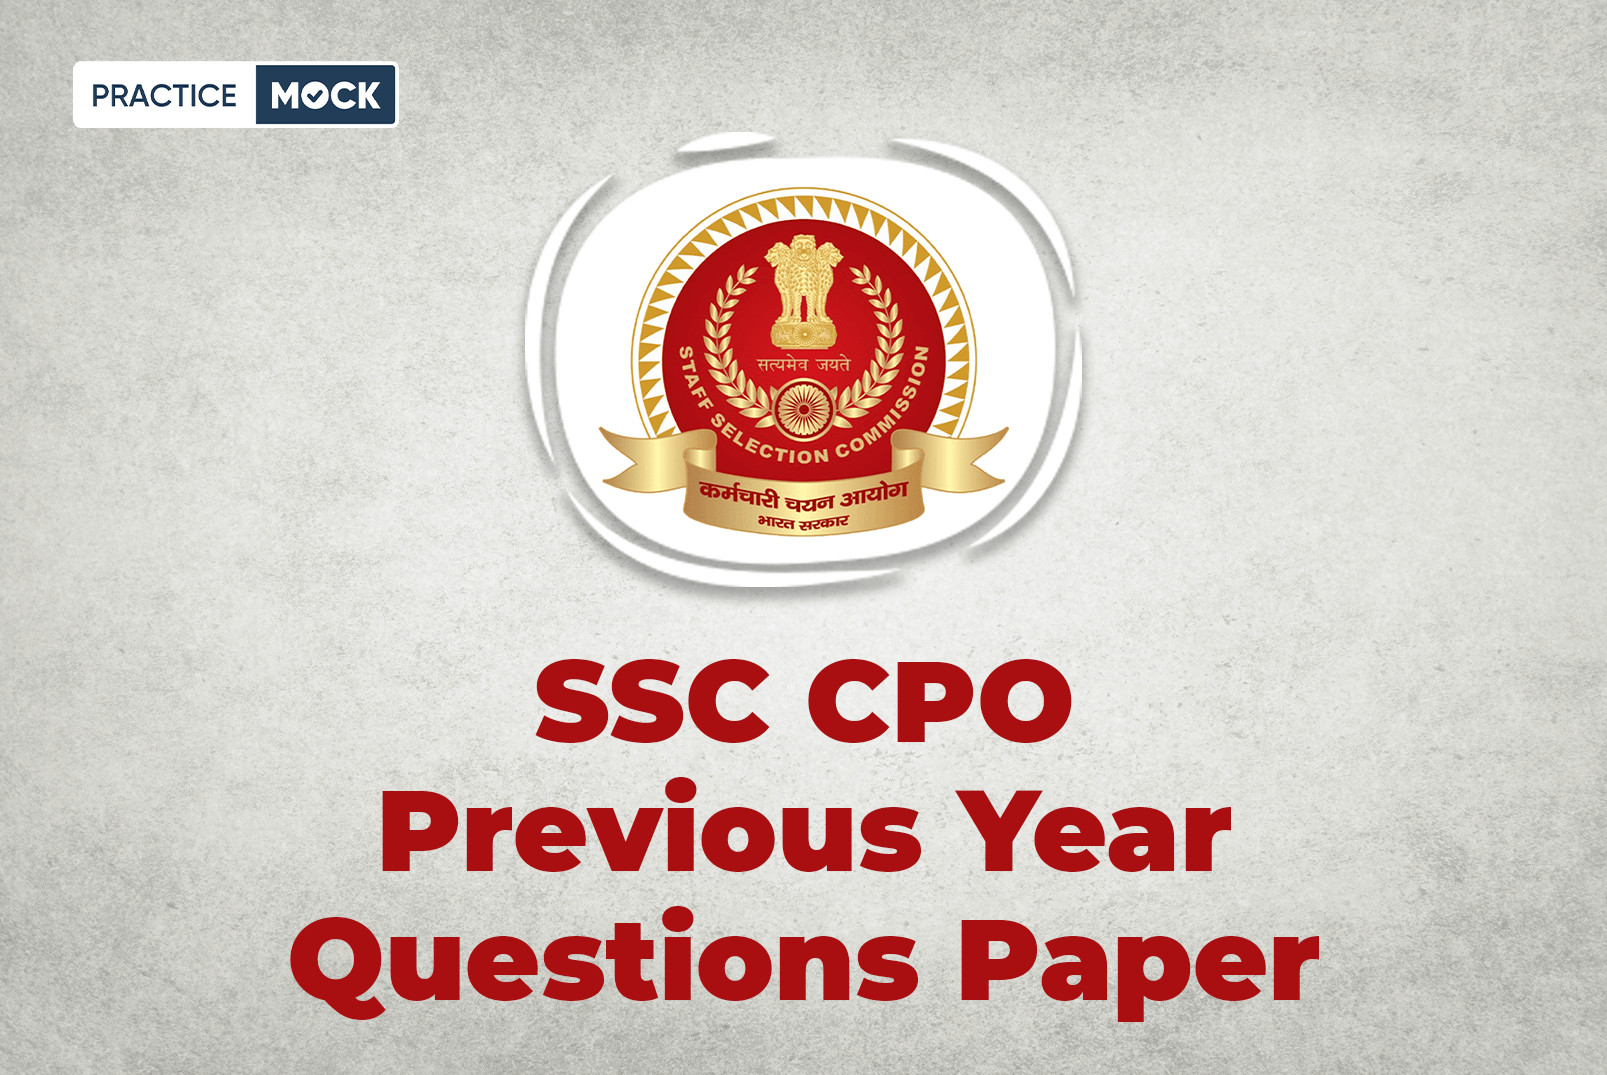 SSC CPO Previous Year Question Paper, Download Free PDF